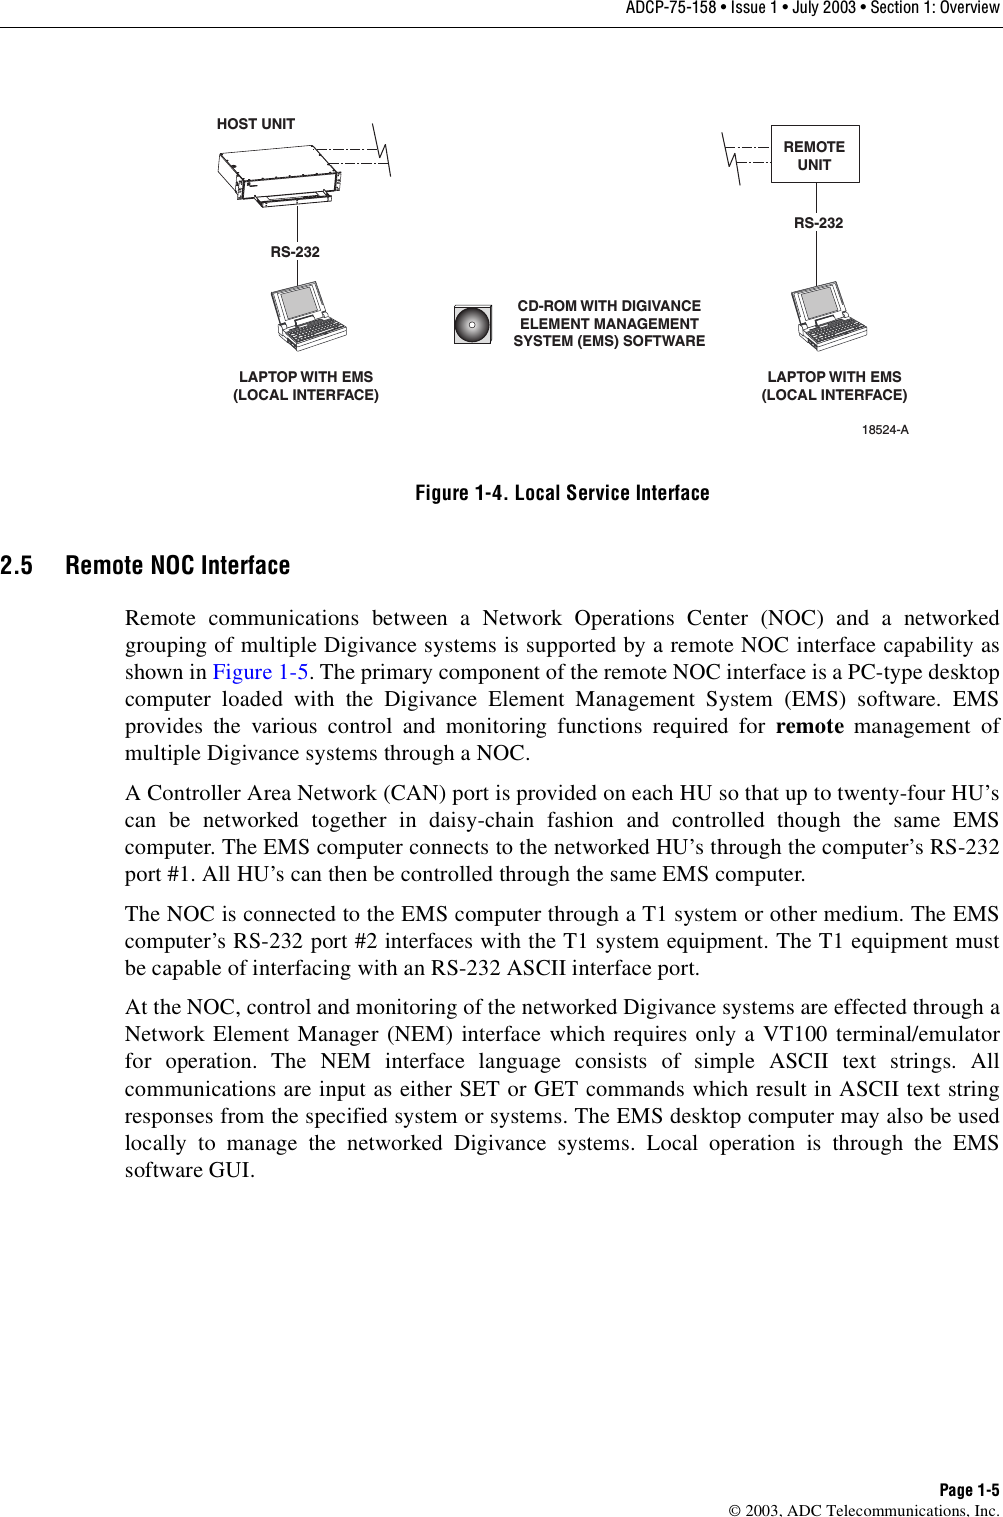 ADCP-75-158 • Issue 1 • July 2003 • Section 1: OverviewPage 1-5© 2003, ADC Telecommunications, Inc.Figure 1-4. Local Service Interface2.5 Remote NOC InterfaceRemote communications between a Network Operations Center (NOC) and a networkedgrouping of multiple Digivance systems is supported by a remote NOC interface capability asshown in Figure 1-5. The primary component of the remote NOC interface is a PC-type desktopcomputer loaded with the Digivance Element Management System (EMS) software. EMSprovides the various control and monitoring functions required for remote management ofmultiple Digivance systems through a NOC. A Controller Area Network (CAN) port is provided on each HU so that up to twenty-four HU’scan be networked together in daisy-chain fashion and controlled though the same EMScomputer. The EMS computer connects to the networked HU’s through the computer’s RS-232port #1. All HU’s can then be controlled through the same EMS computer. The NOC is connected to the EMS computer through a T1 system or other medium. The EMScomputer’s RS-232 port #2 interfaces with the T1 system equipment. The T1 equipment mustbe capable of interfacing with an RS-232 ASCII interface port. At the NOC, control and monitoring of the networked Digivance systems are effected through aNetwork Element Manager (NEM) interface which requires only a VT100 terminal/emulatorfor operation. The NEM interface language consists of simple ASCII text strings. Allcommunications are input as either SET or GET commands which result in ASCII text stringresponses from the specified system or systems. The EMS desktop computer may also be usedlocally to manage the networked Digivance systems. Local operation is through the EMSsoftware GUI. HOST UNITLAPTOP WITH EMS(LOCAL INTERFACE)LAPTOP WITH EMS(LOCAL INTERFACE)18524-ACD-ROM WITH DIGIVANCEELEMENT MANAGEMENTSYSTEM (EMS) SOFTWAREREMOTEUNITRS-232RS-232